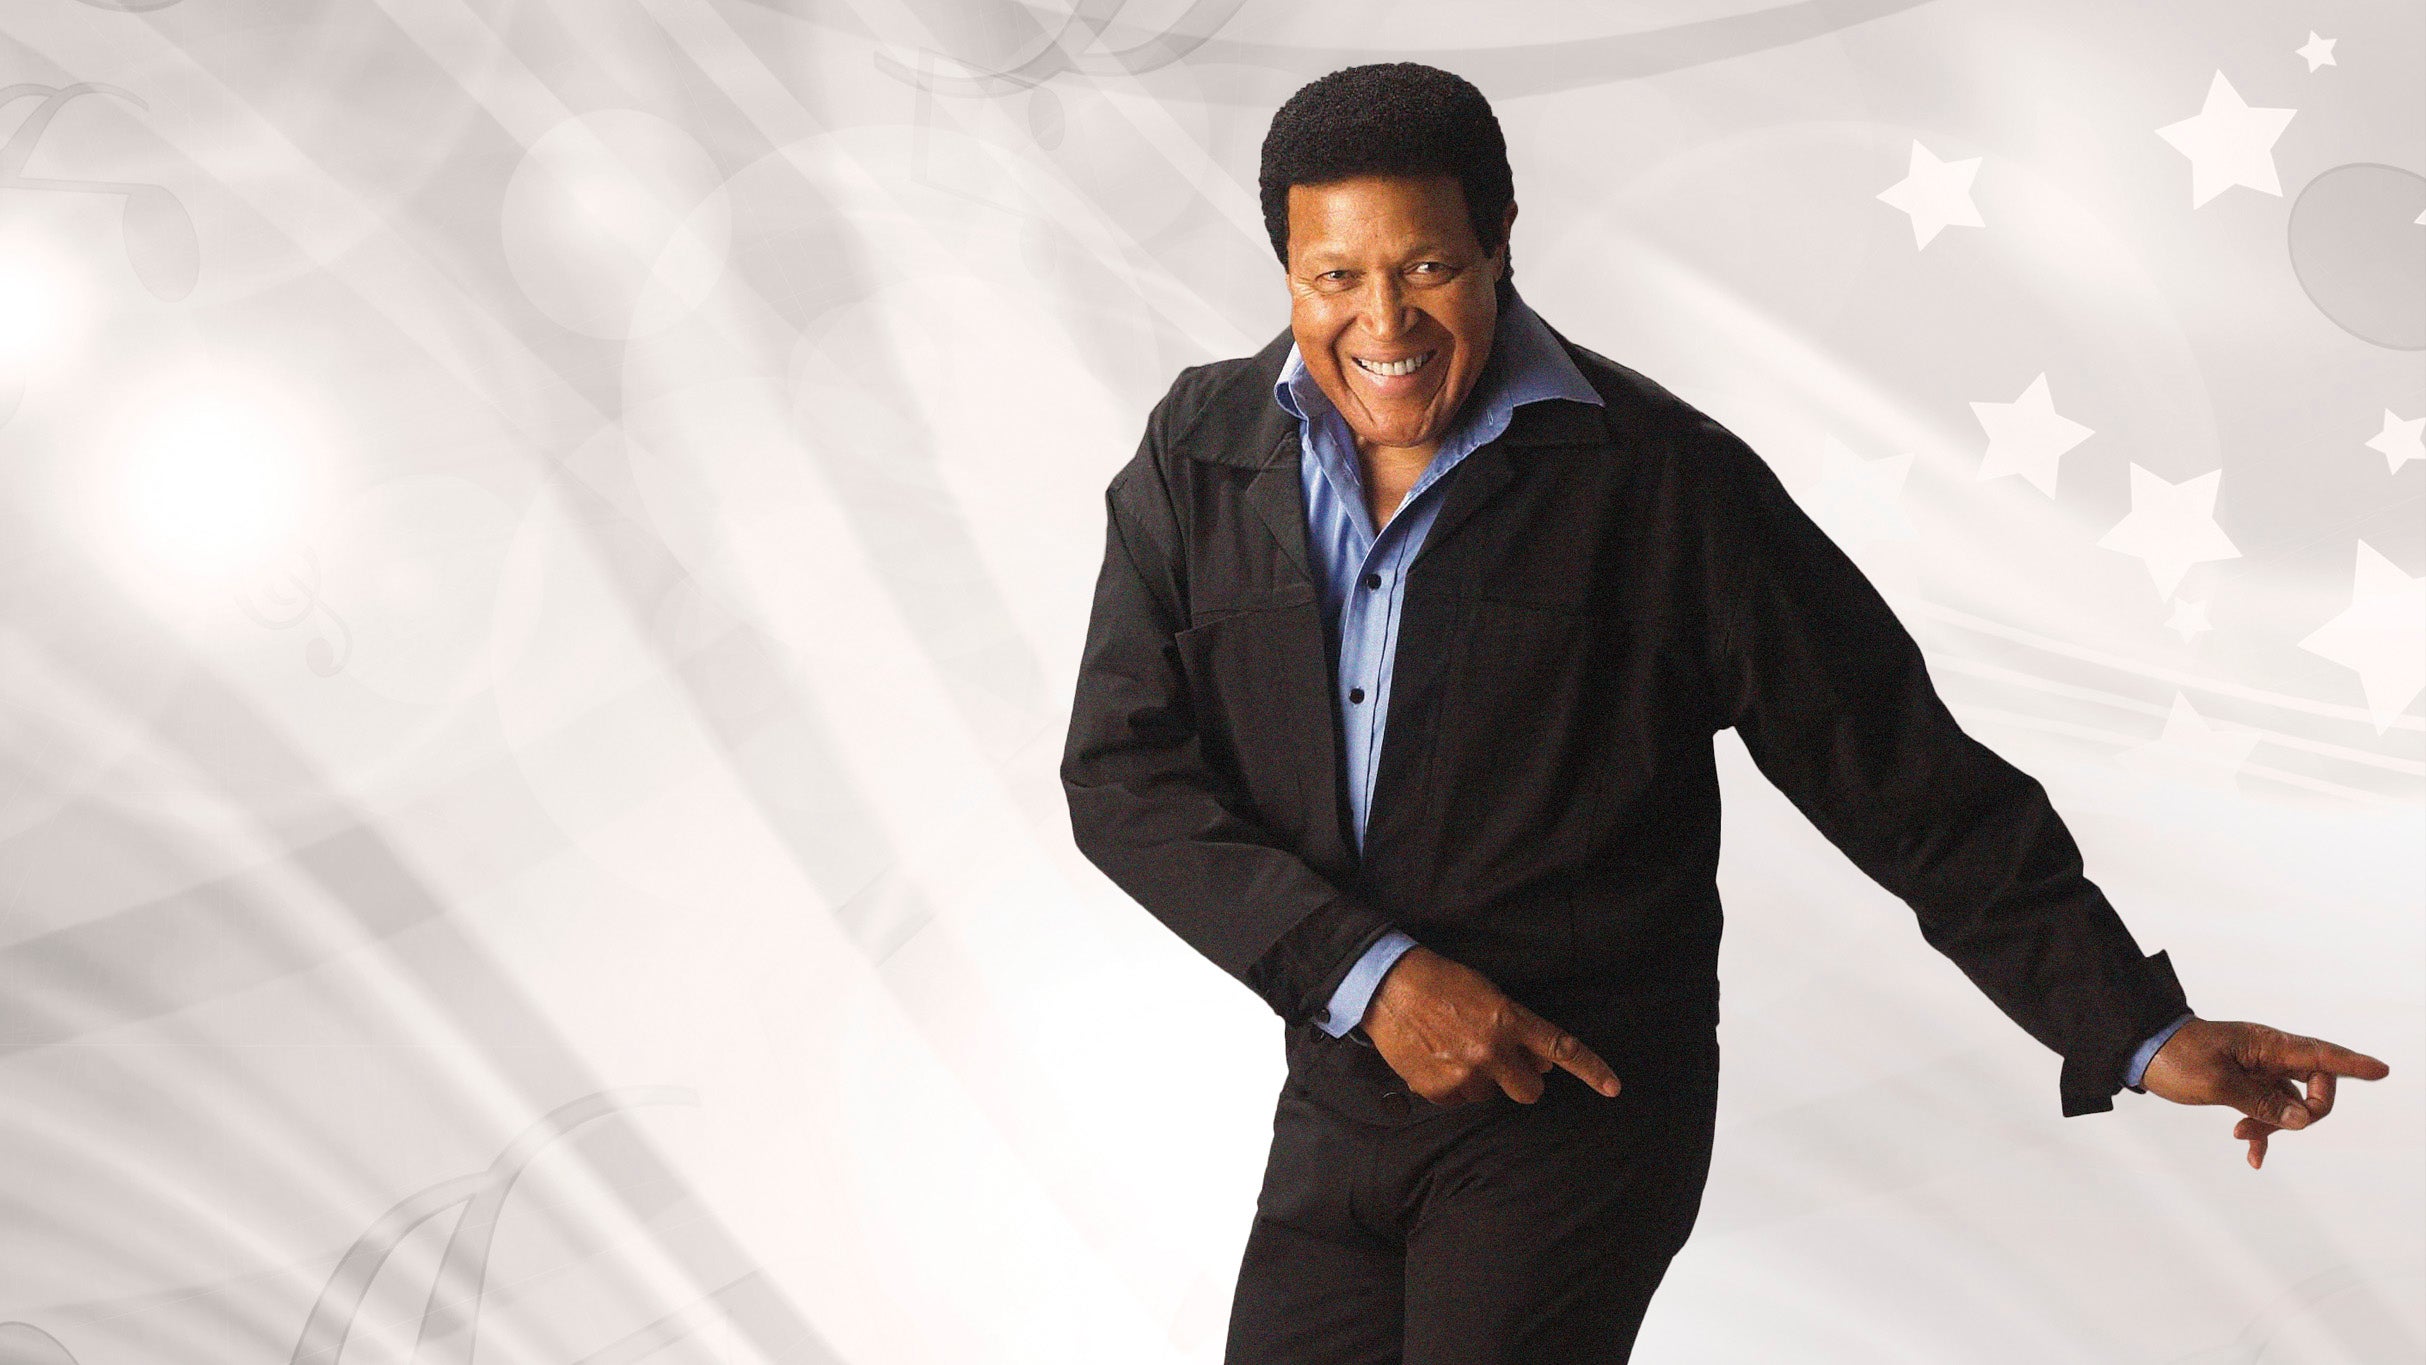 Chubby Checker in Niagara Falls promo photo for OLG Stage presale offer code